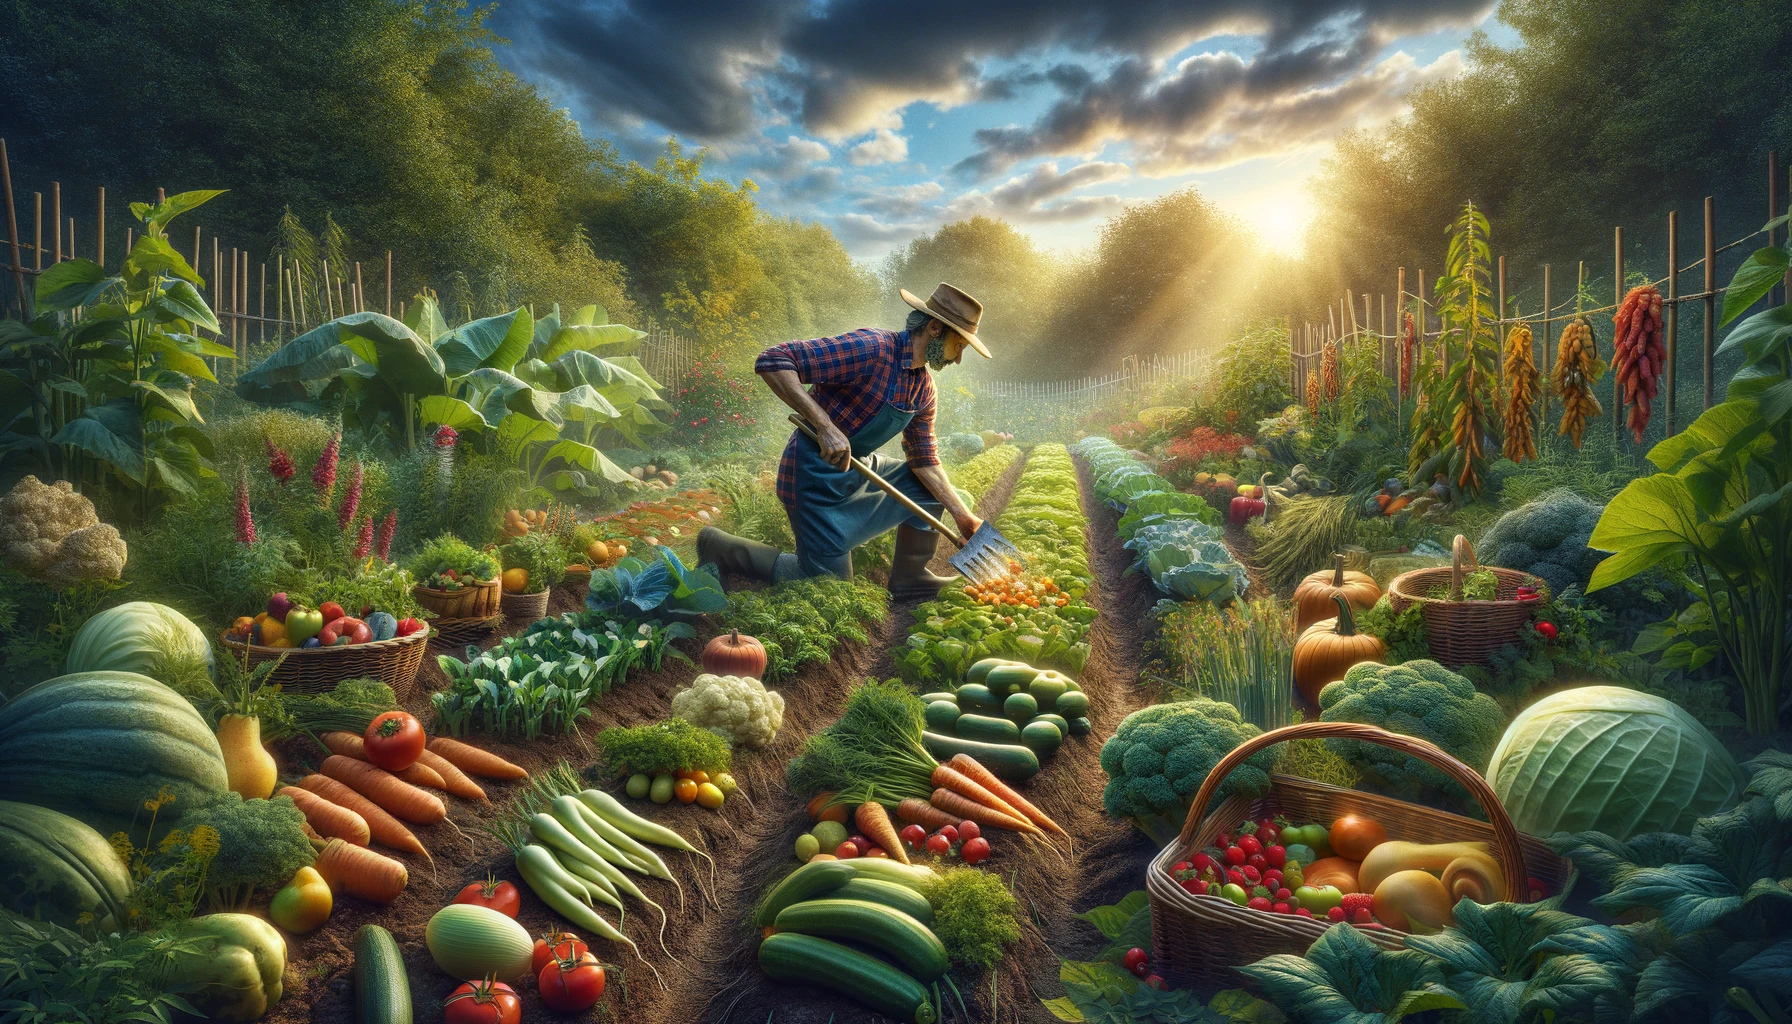 A gardener selects ripe produce in a lush garden, demonstrating harvesting techniques for the best yield, set in a garden at peak harvest season